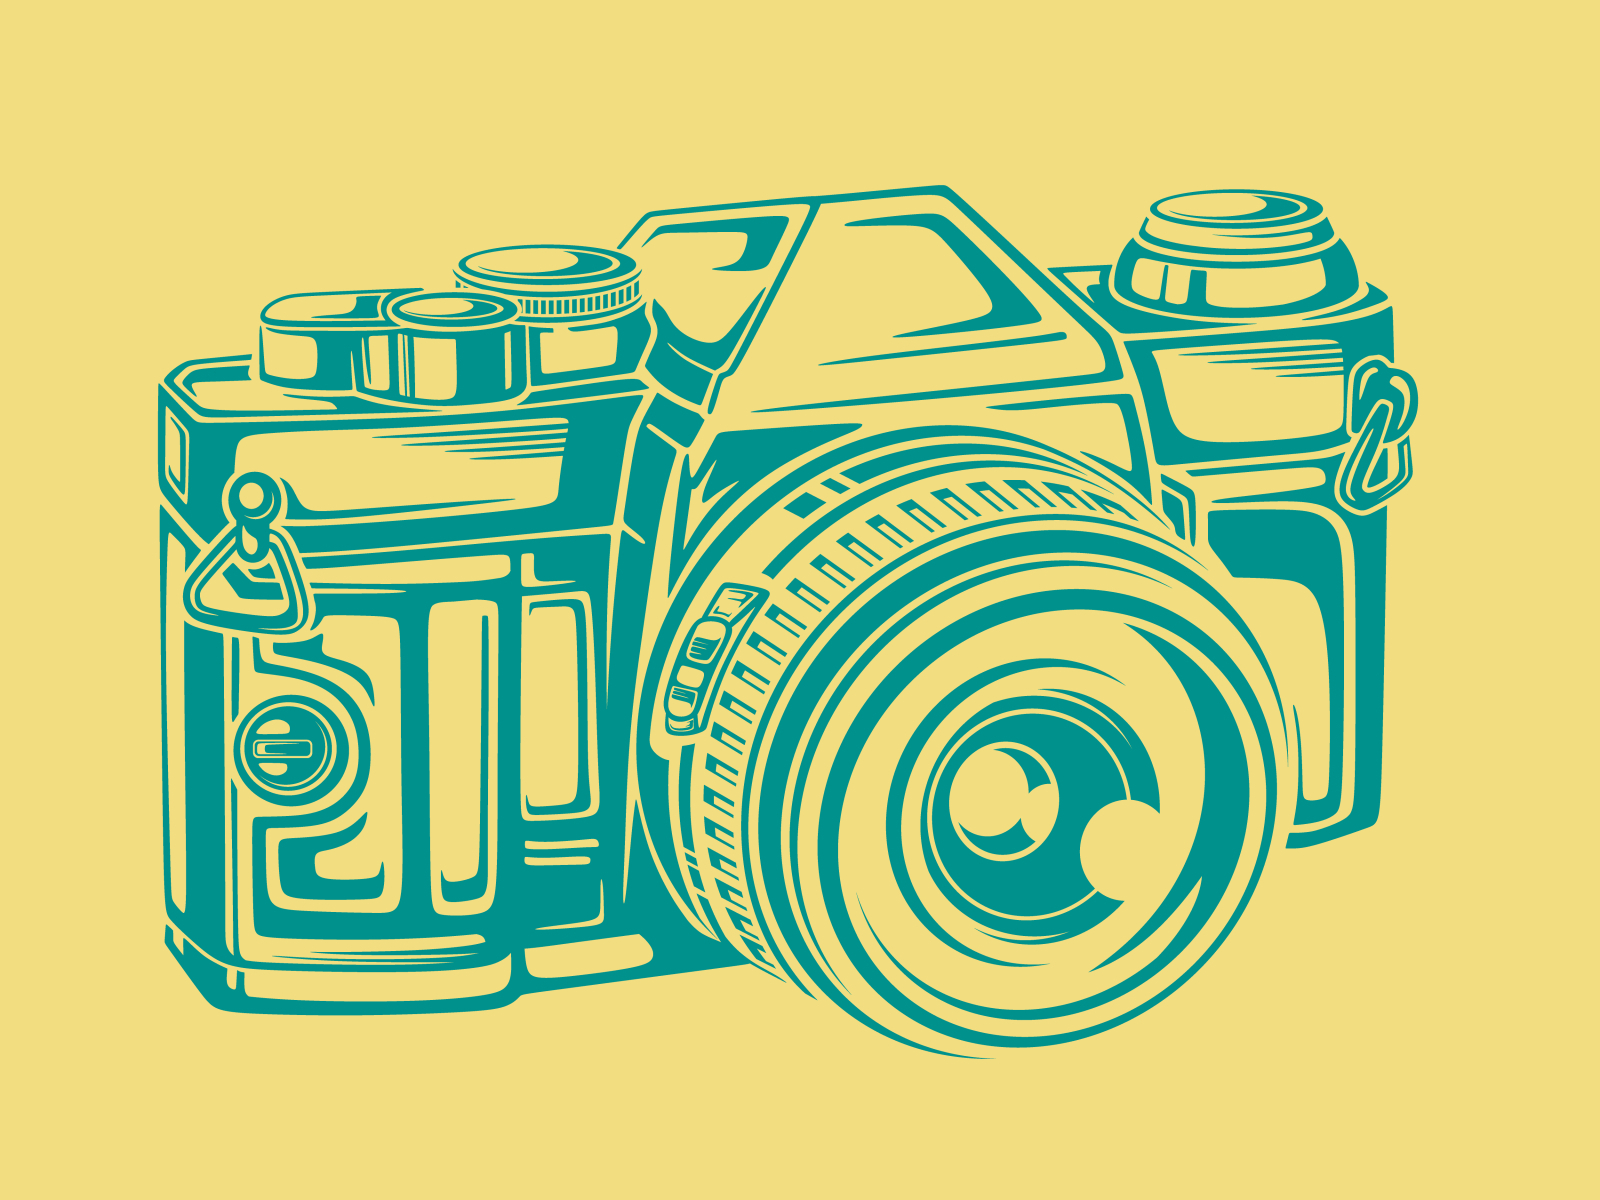 Vintage Professional Camera by Dicky on Dribbble